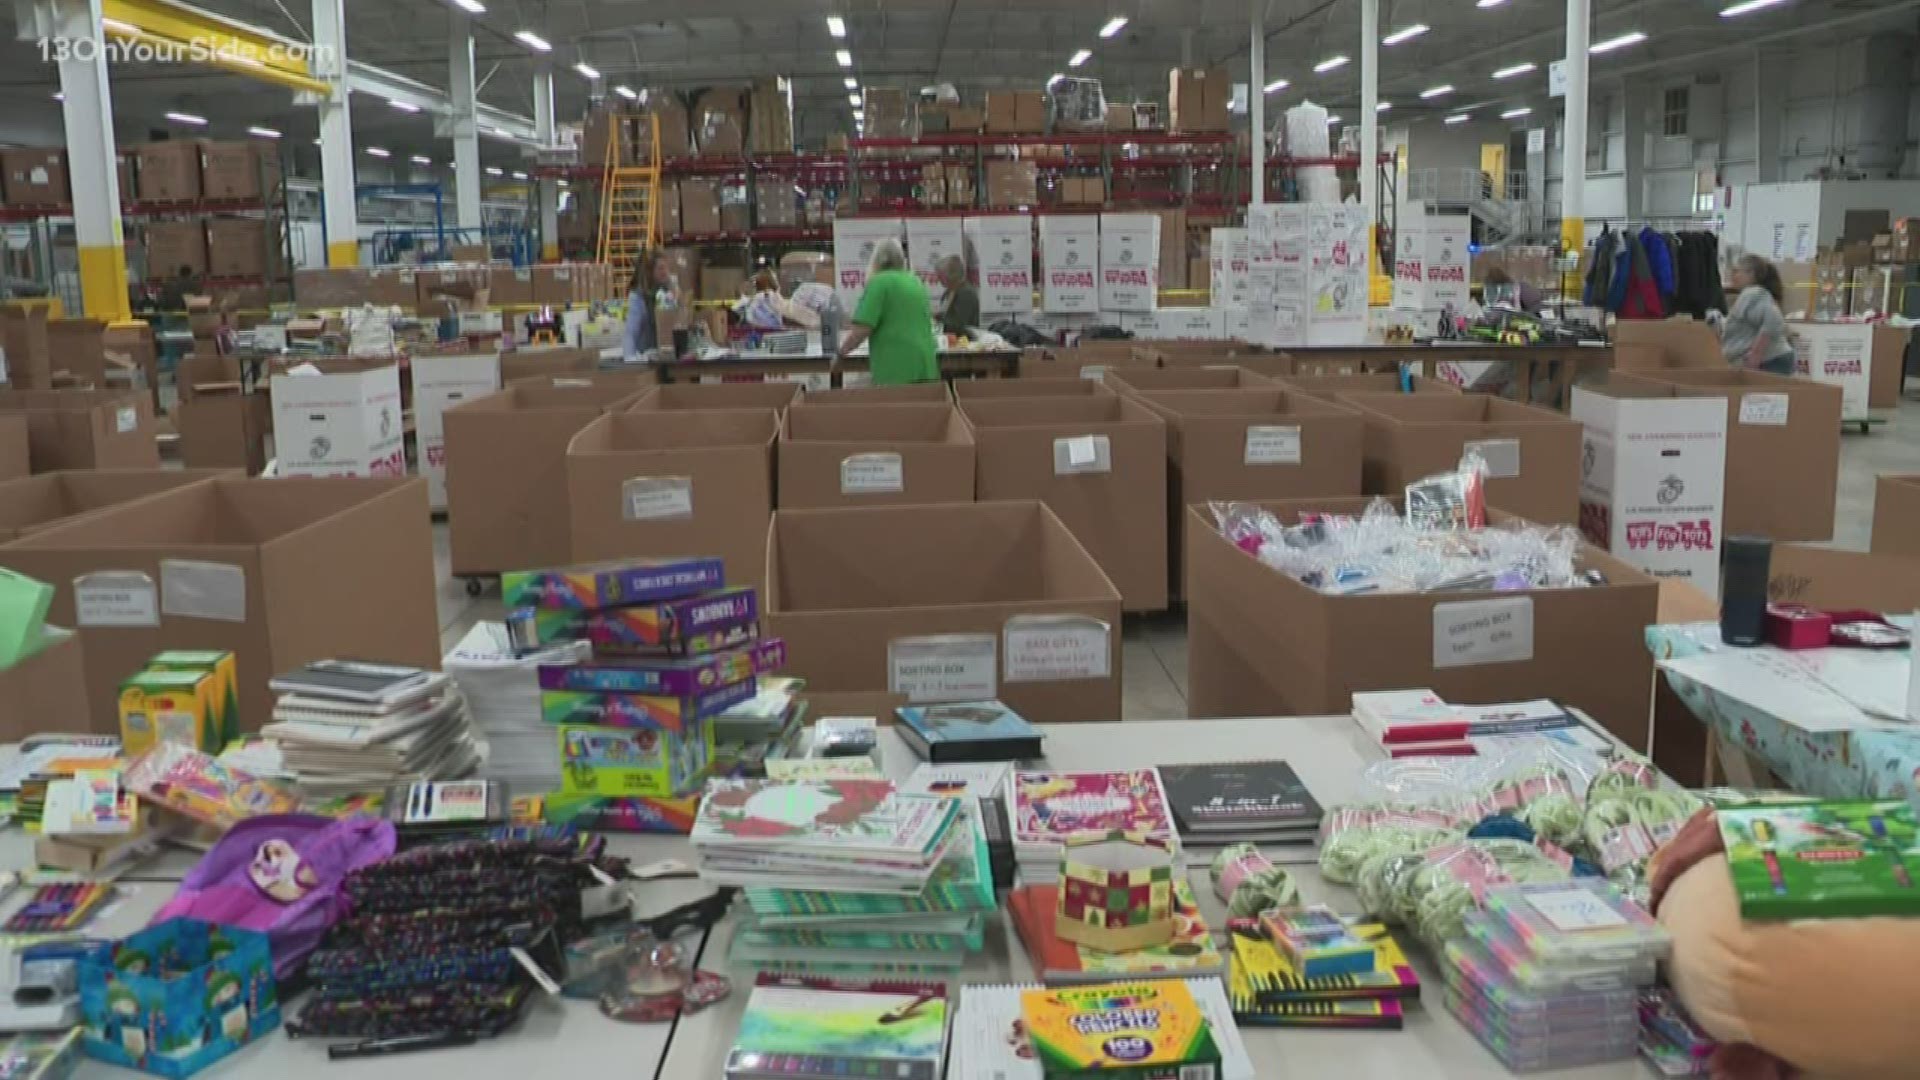 For the second straight year, Flow-Rite will again provide the necessary space for Toys for Tots.